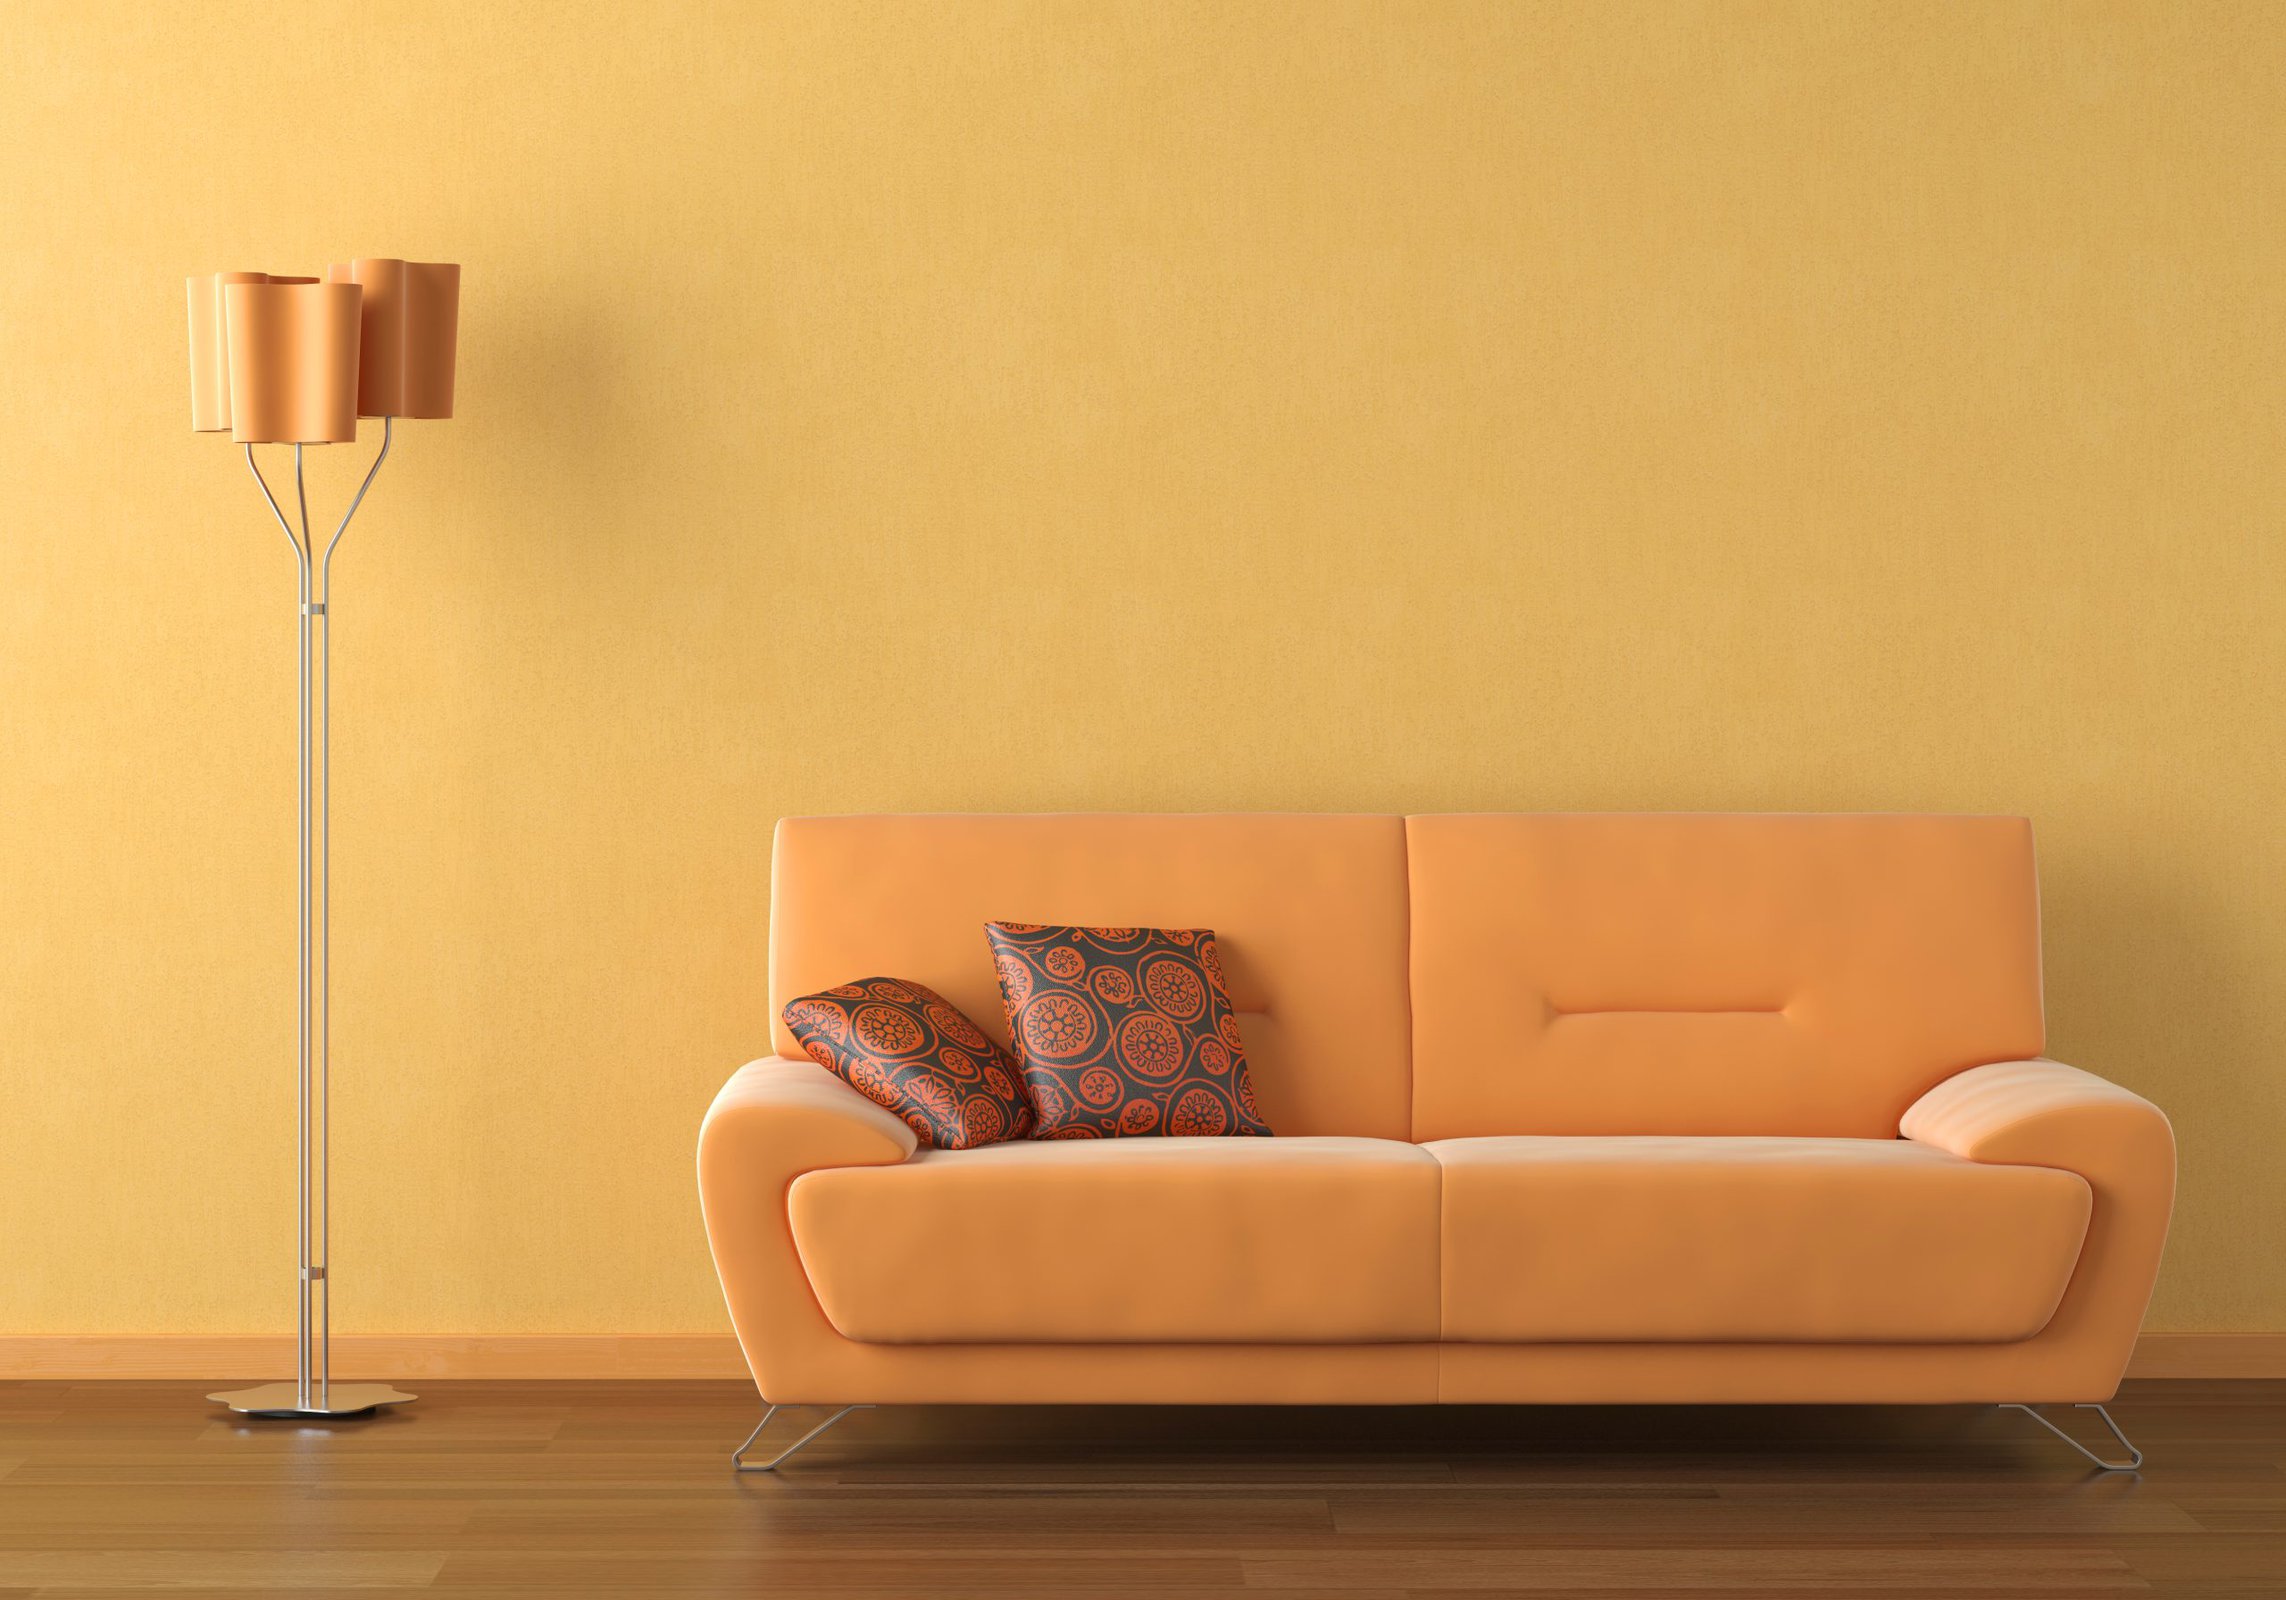  Create a Monochromatic Look With Orange Furniture scaled